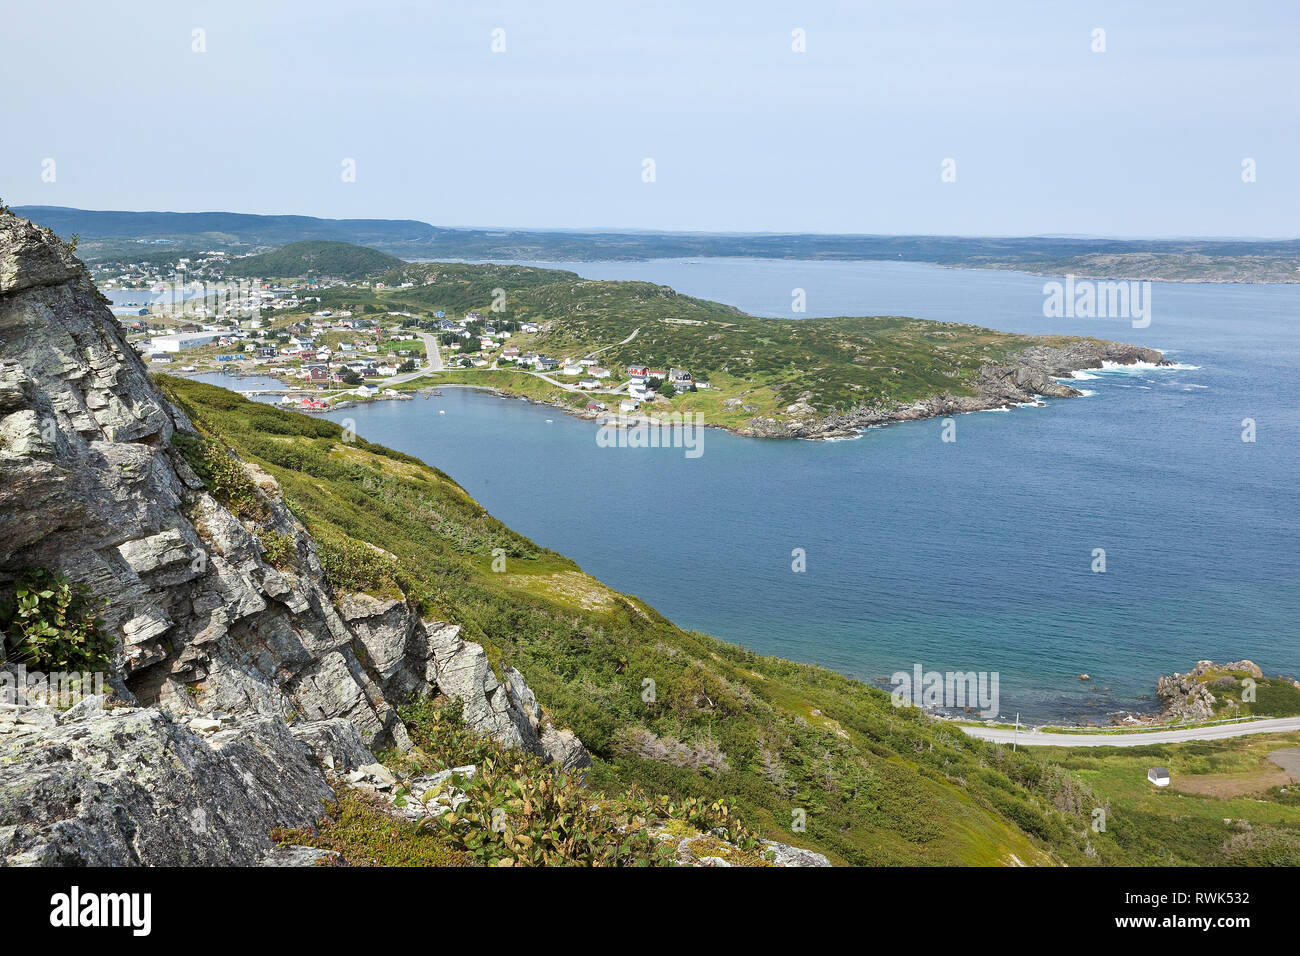 St. Anthony Harbour and the Town of St. Anthony as seen from Daredevil Hill, St. Anthony, Newfoundland, Canada. Stock Photo